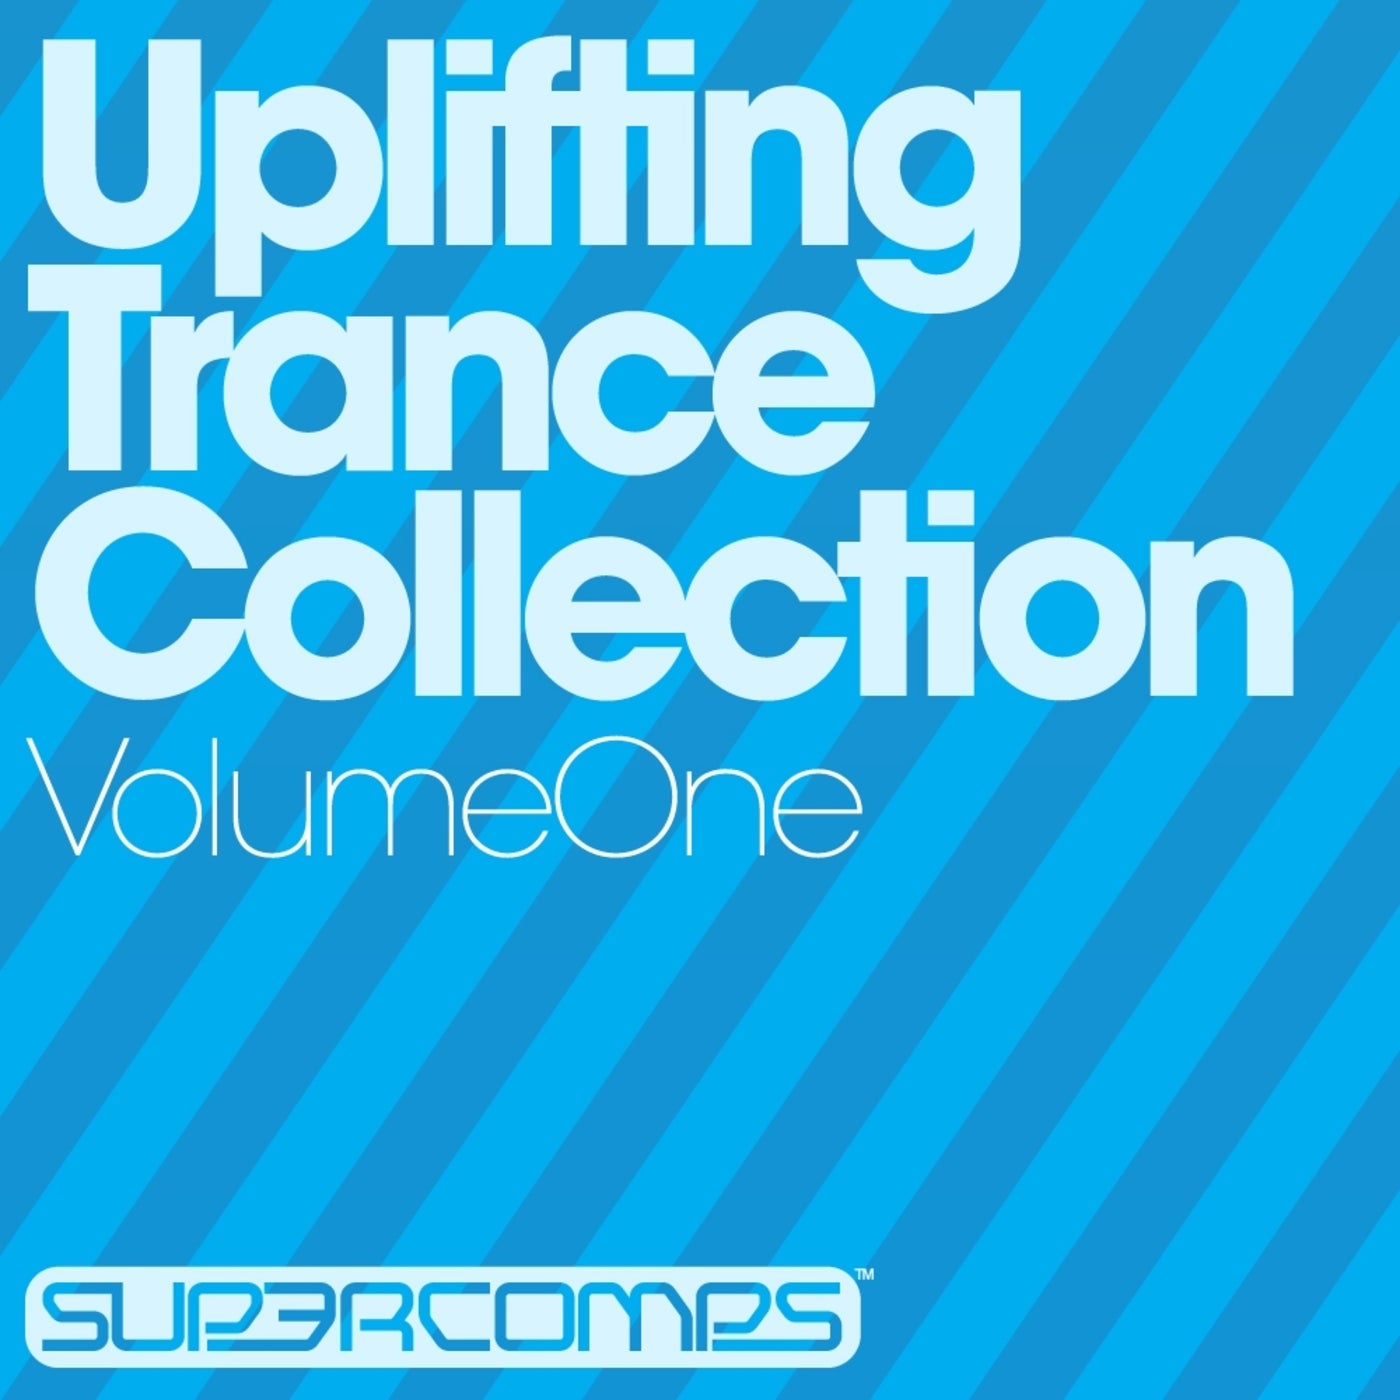 Uplifting Trance Collection - Volume One